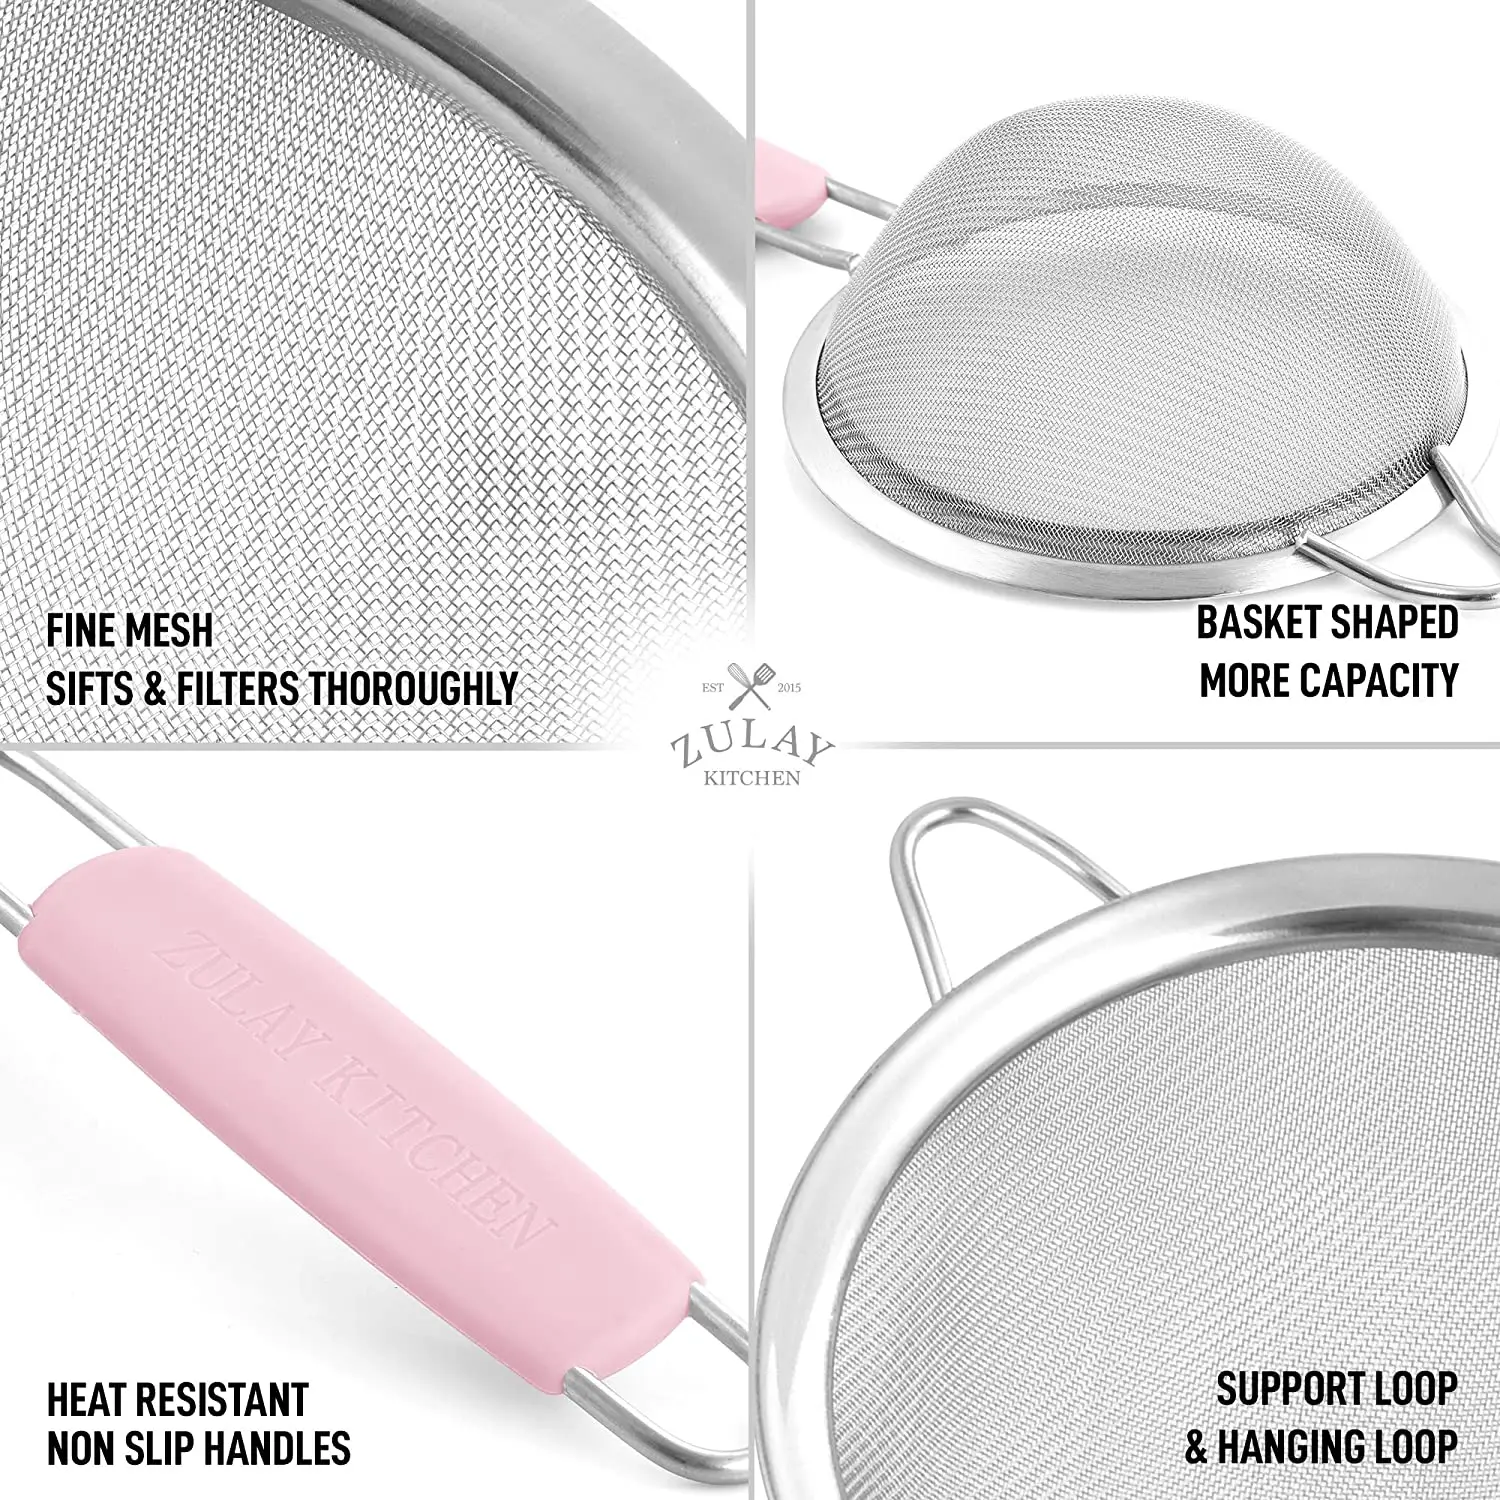 Kitchen Strainer For Sifting, Straining, & Draining (Set of 3)